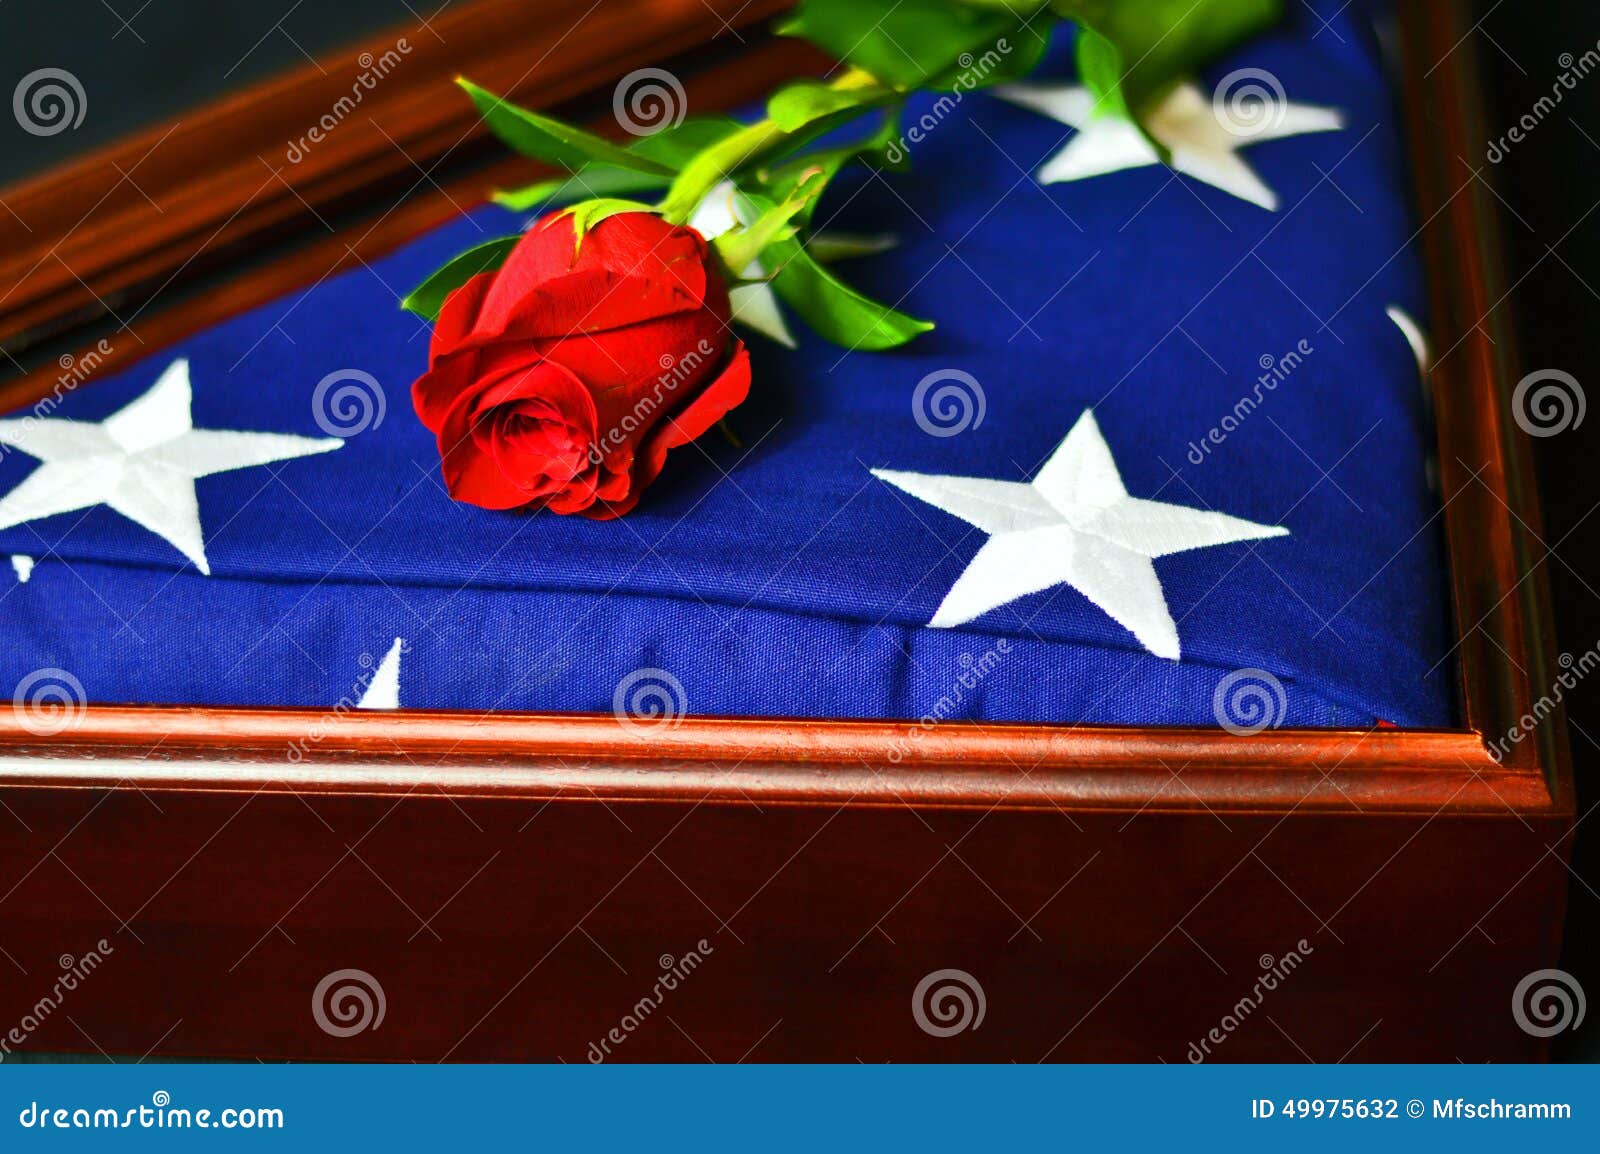 military funeral clipart - photo #30